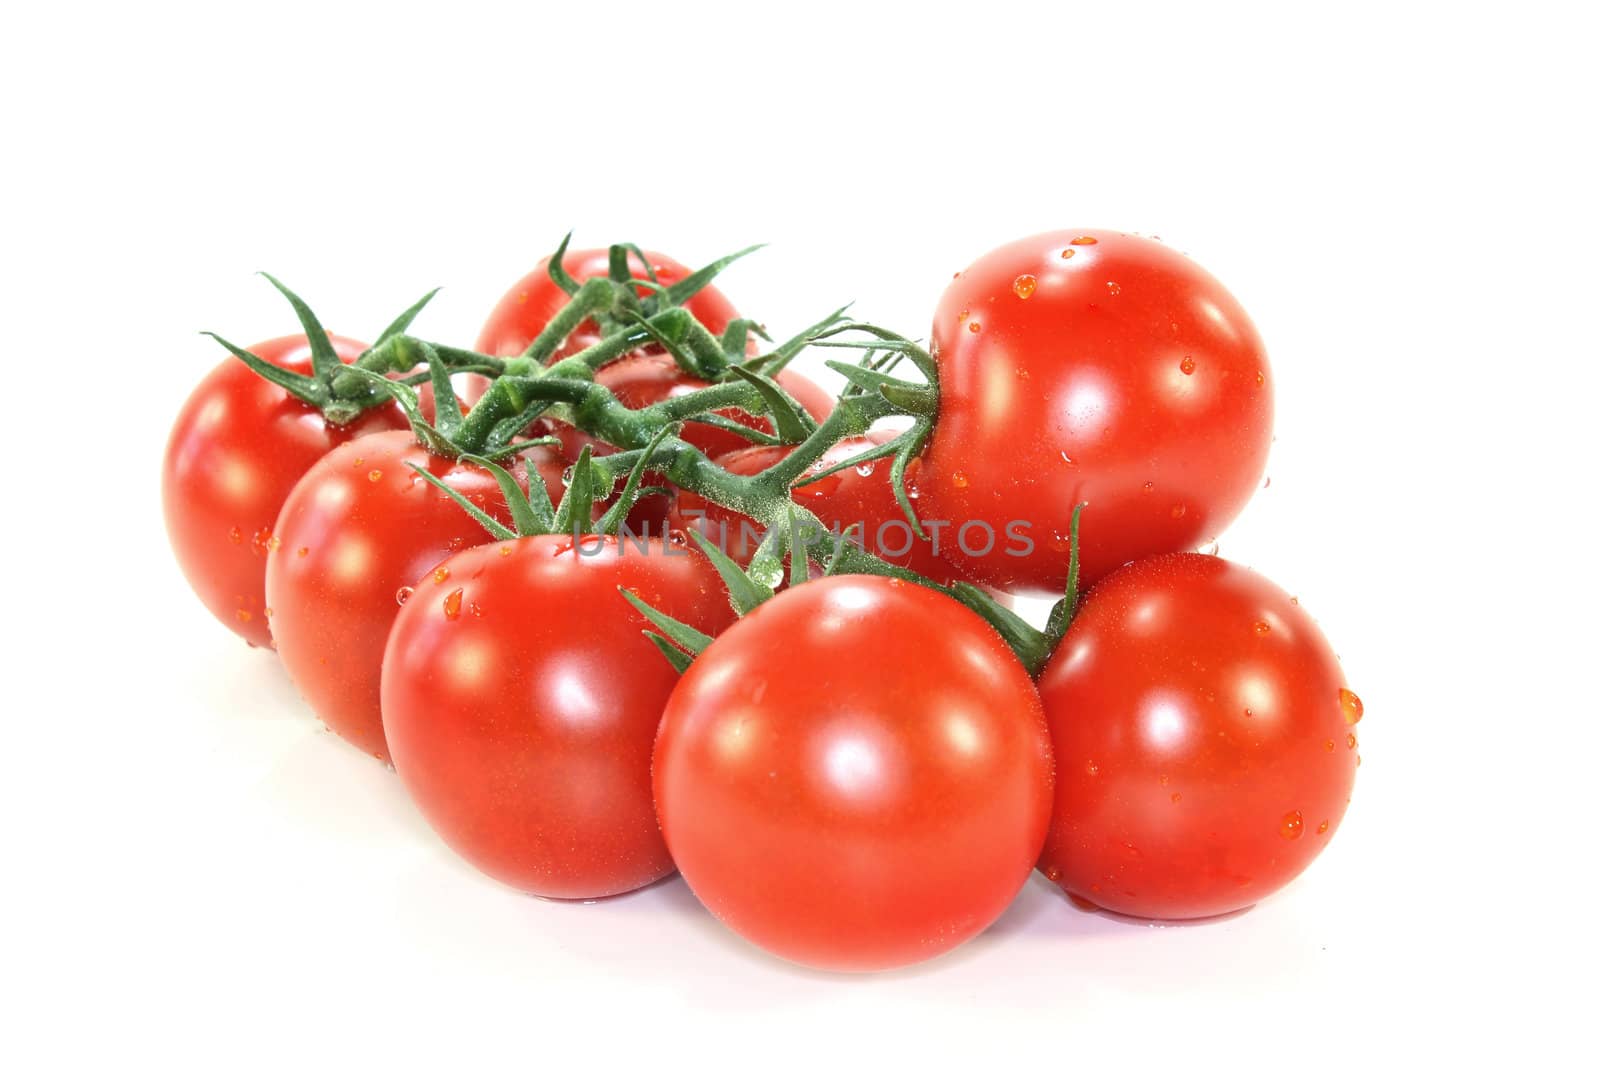 a panicle vine tomatoes on a white background
